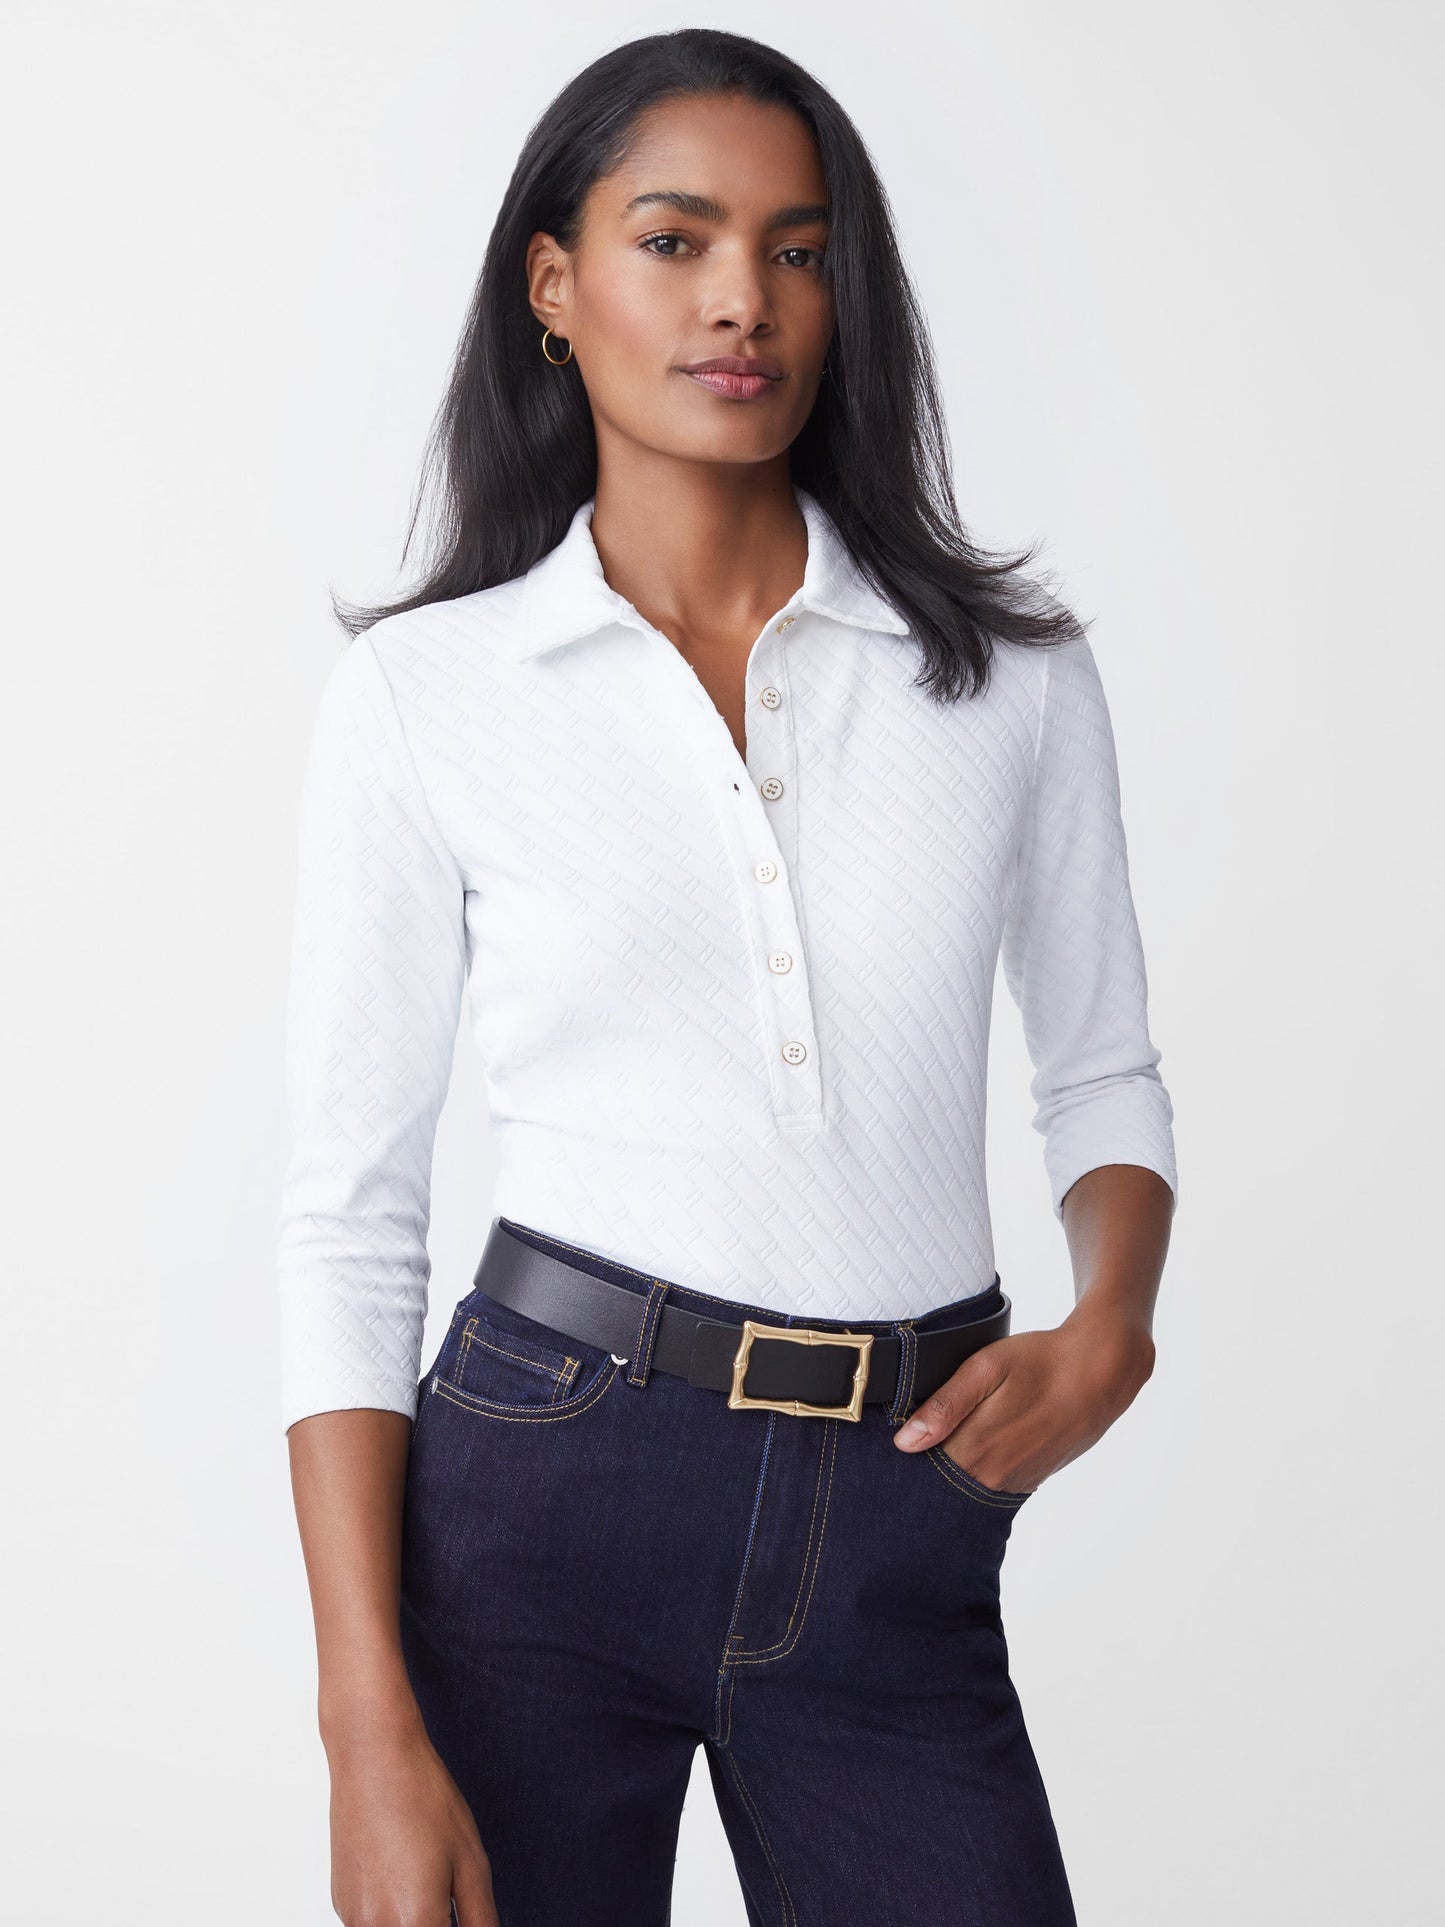 Model wears J.McLaughlin Court 3/4 Sleeve Polo in white made with JMC Catalina Cloth fabric.